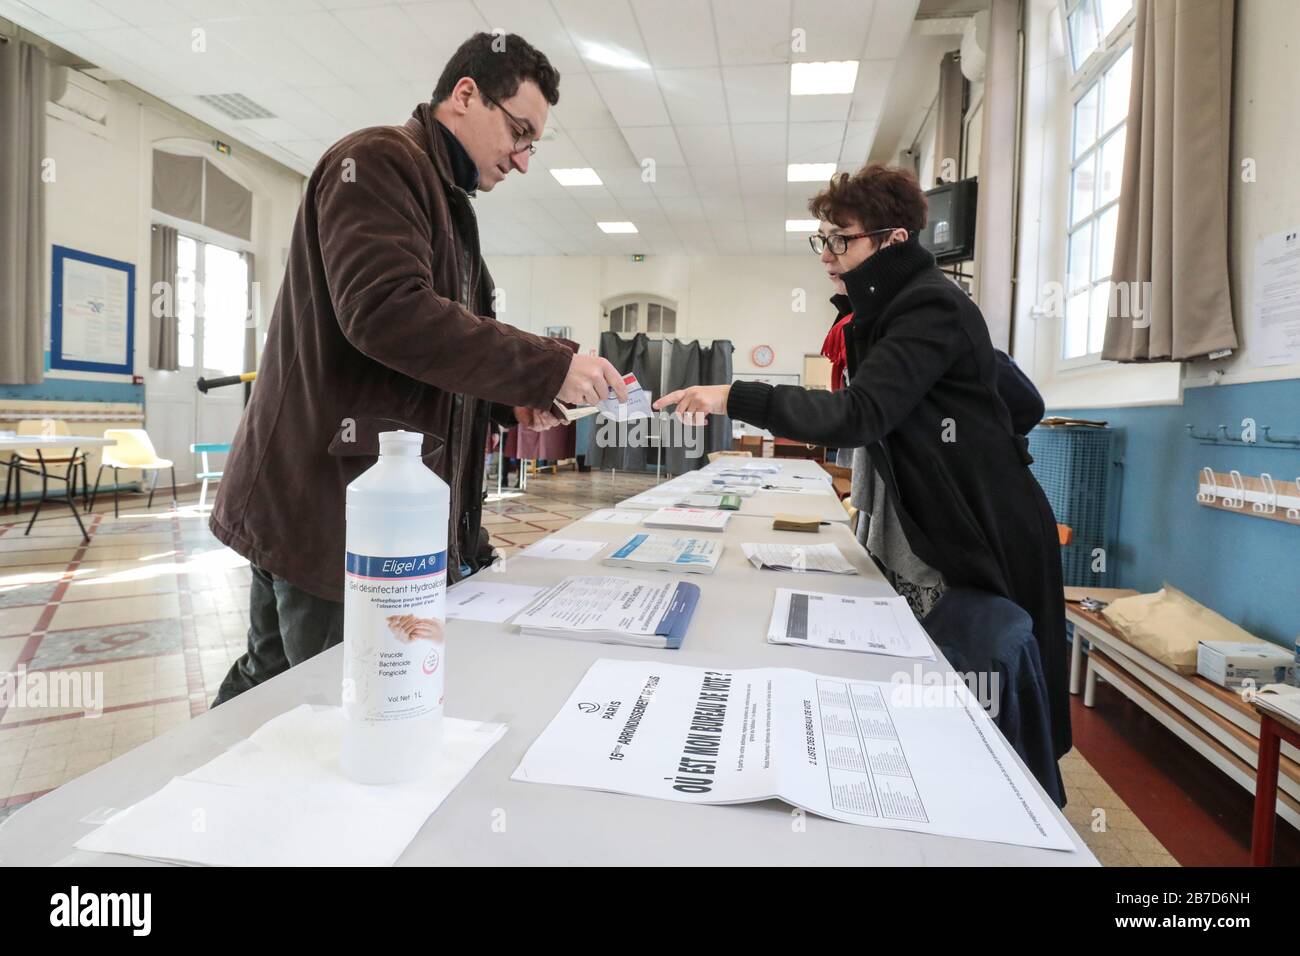 LOCAL ELECTIONS: POLLING STATIONS OPENED IN PARIS Stock Photo